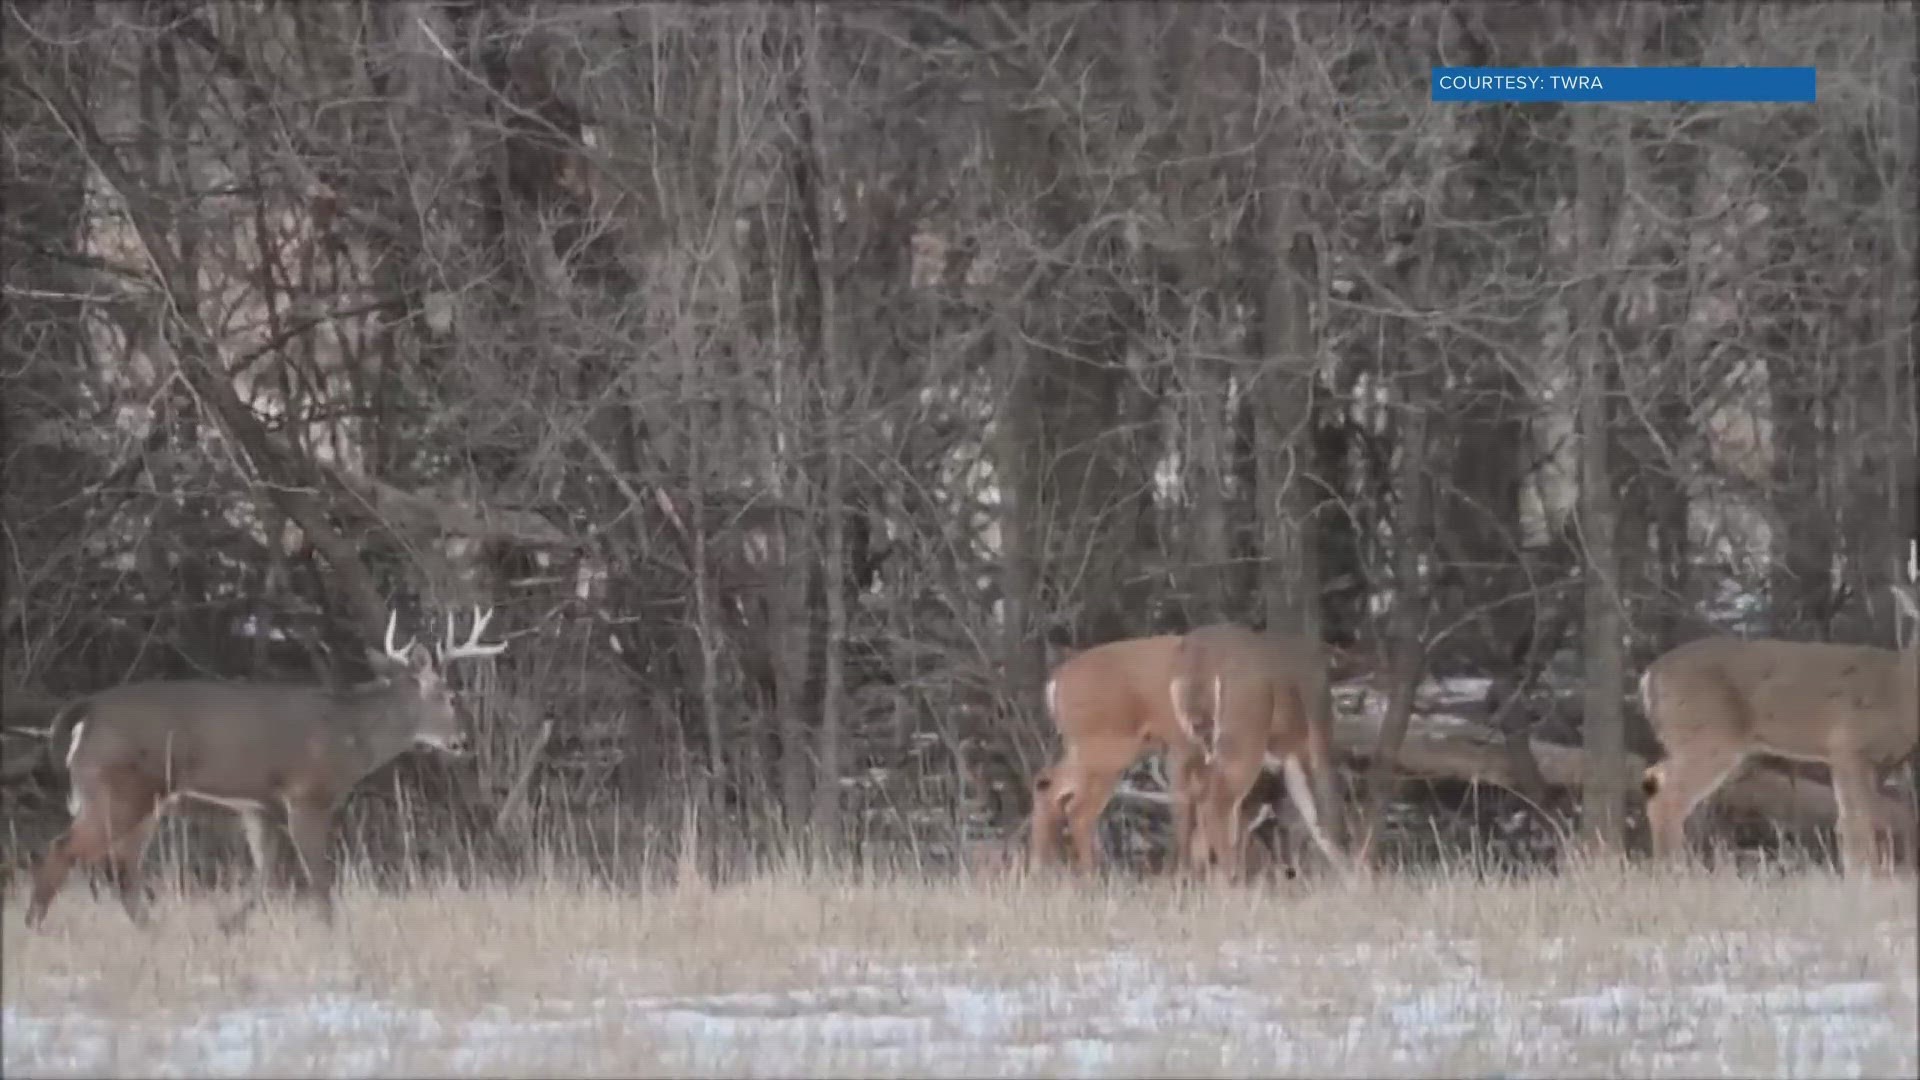 During buck season for hunters, deer can be dangerous for drivers.